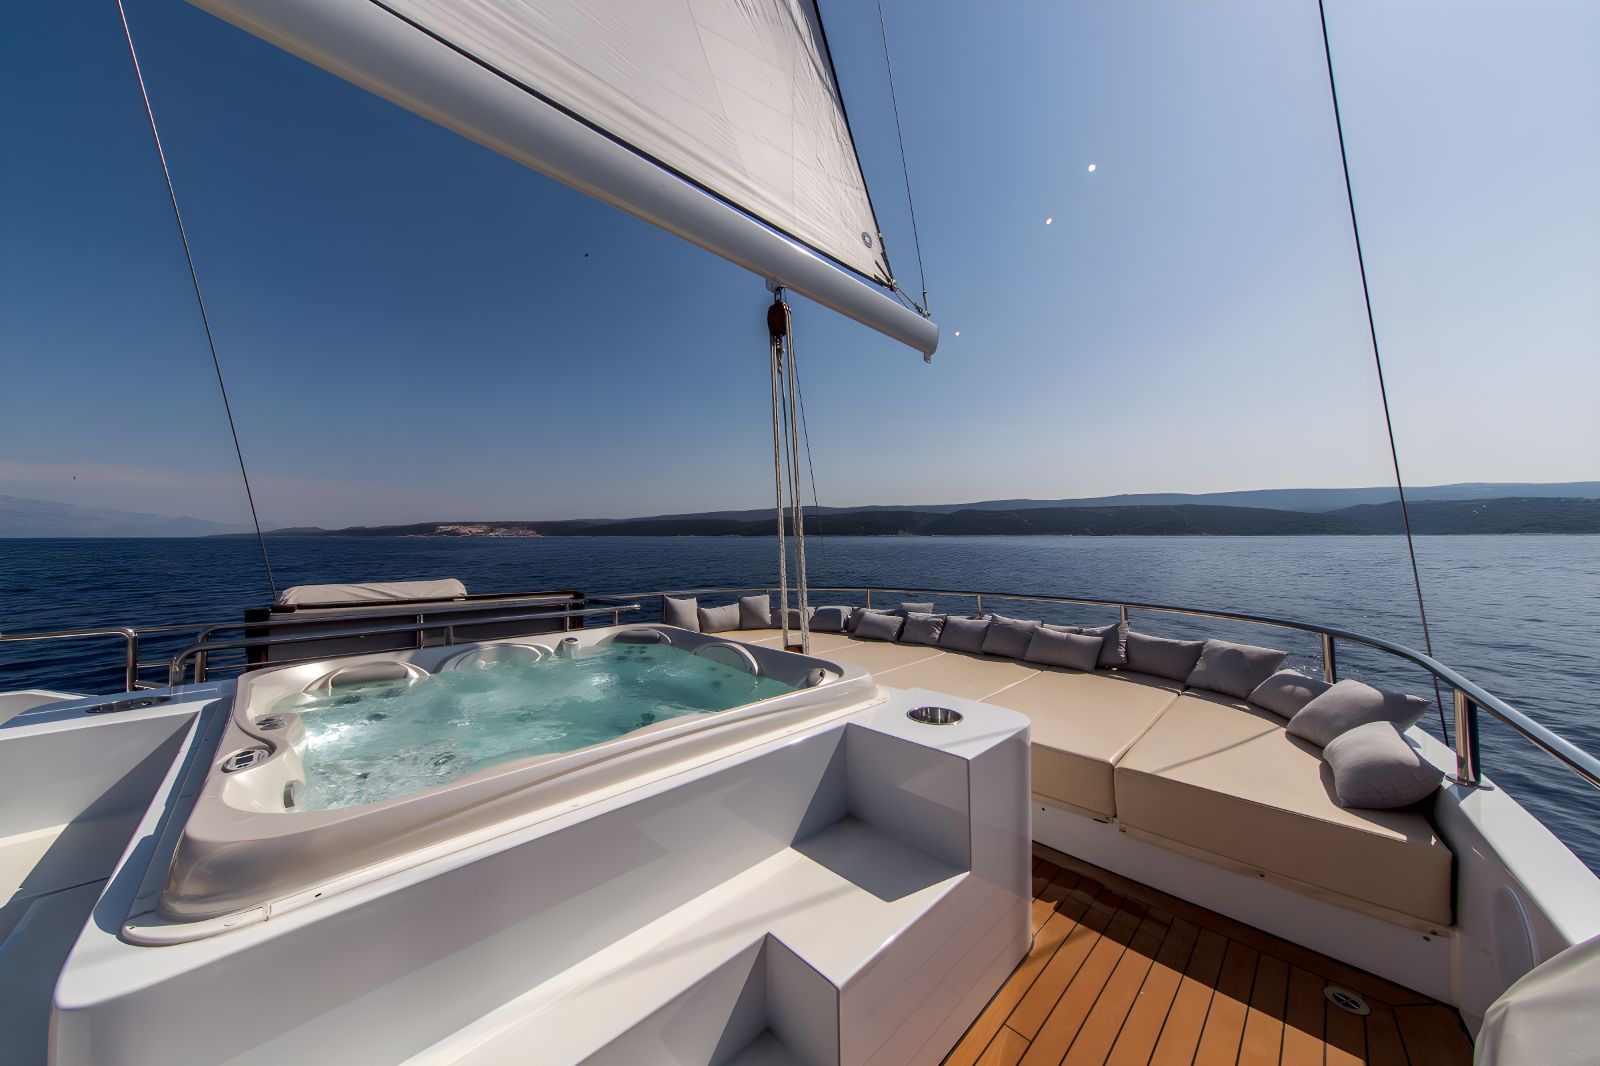 Jacuzzi on the upper deck of the Omnia gulet in Croatia